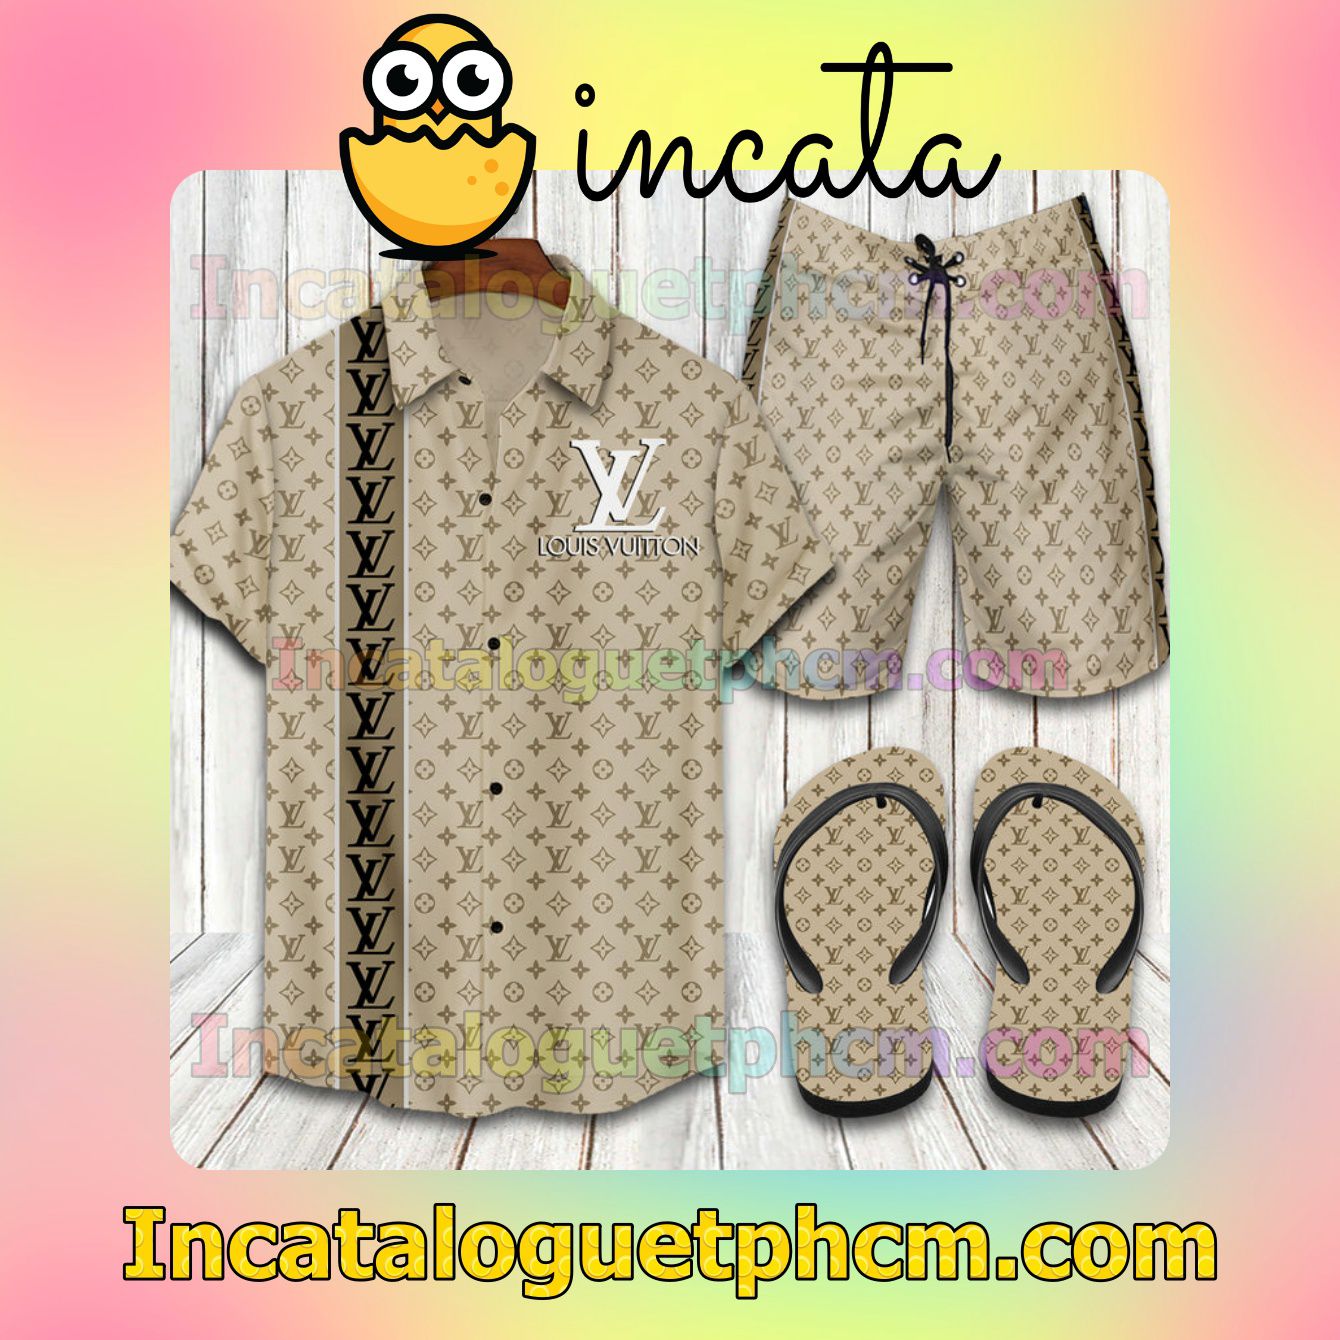 Louis Vuitton 2022 Beige Colored Aloha Shirt And Shorts